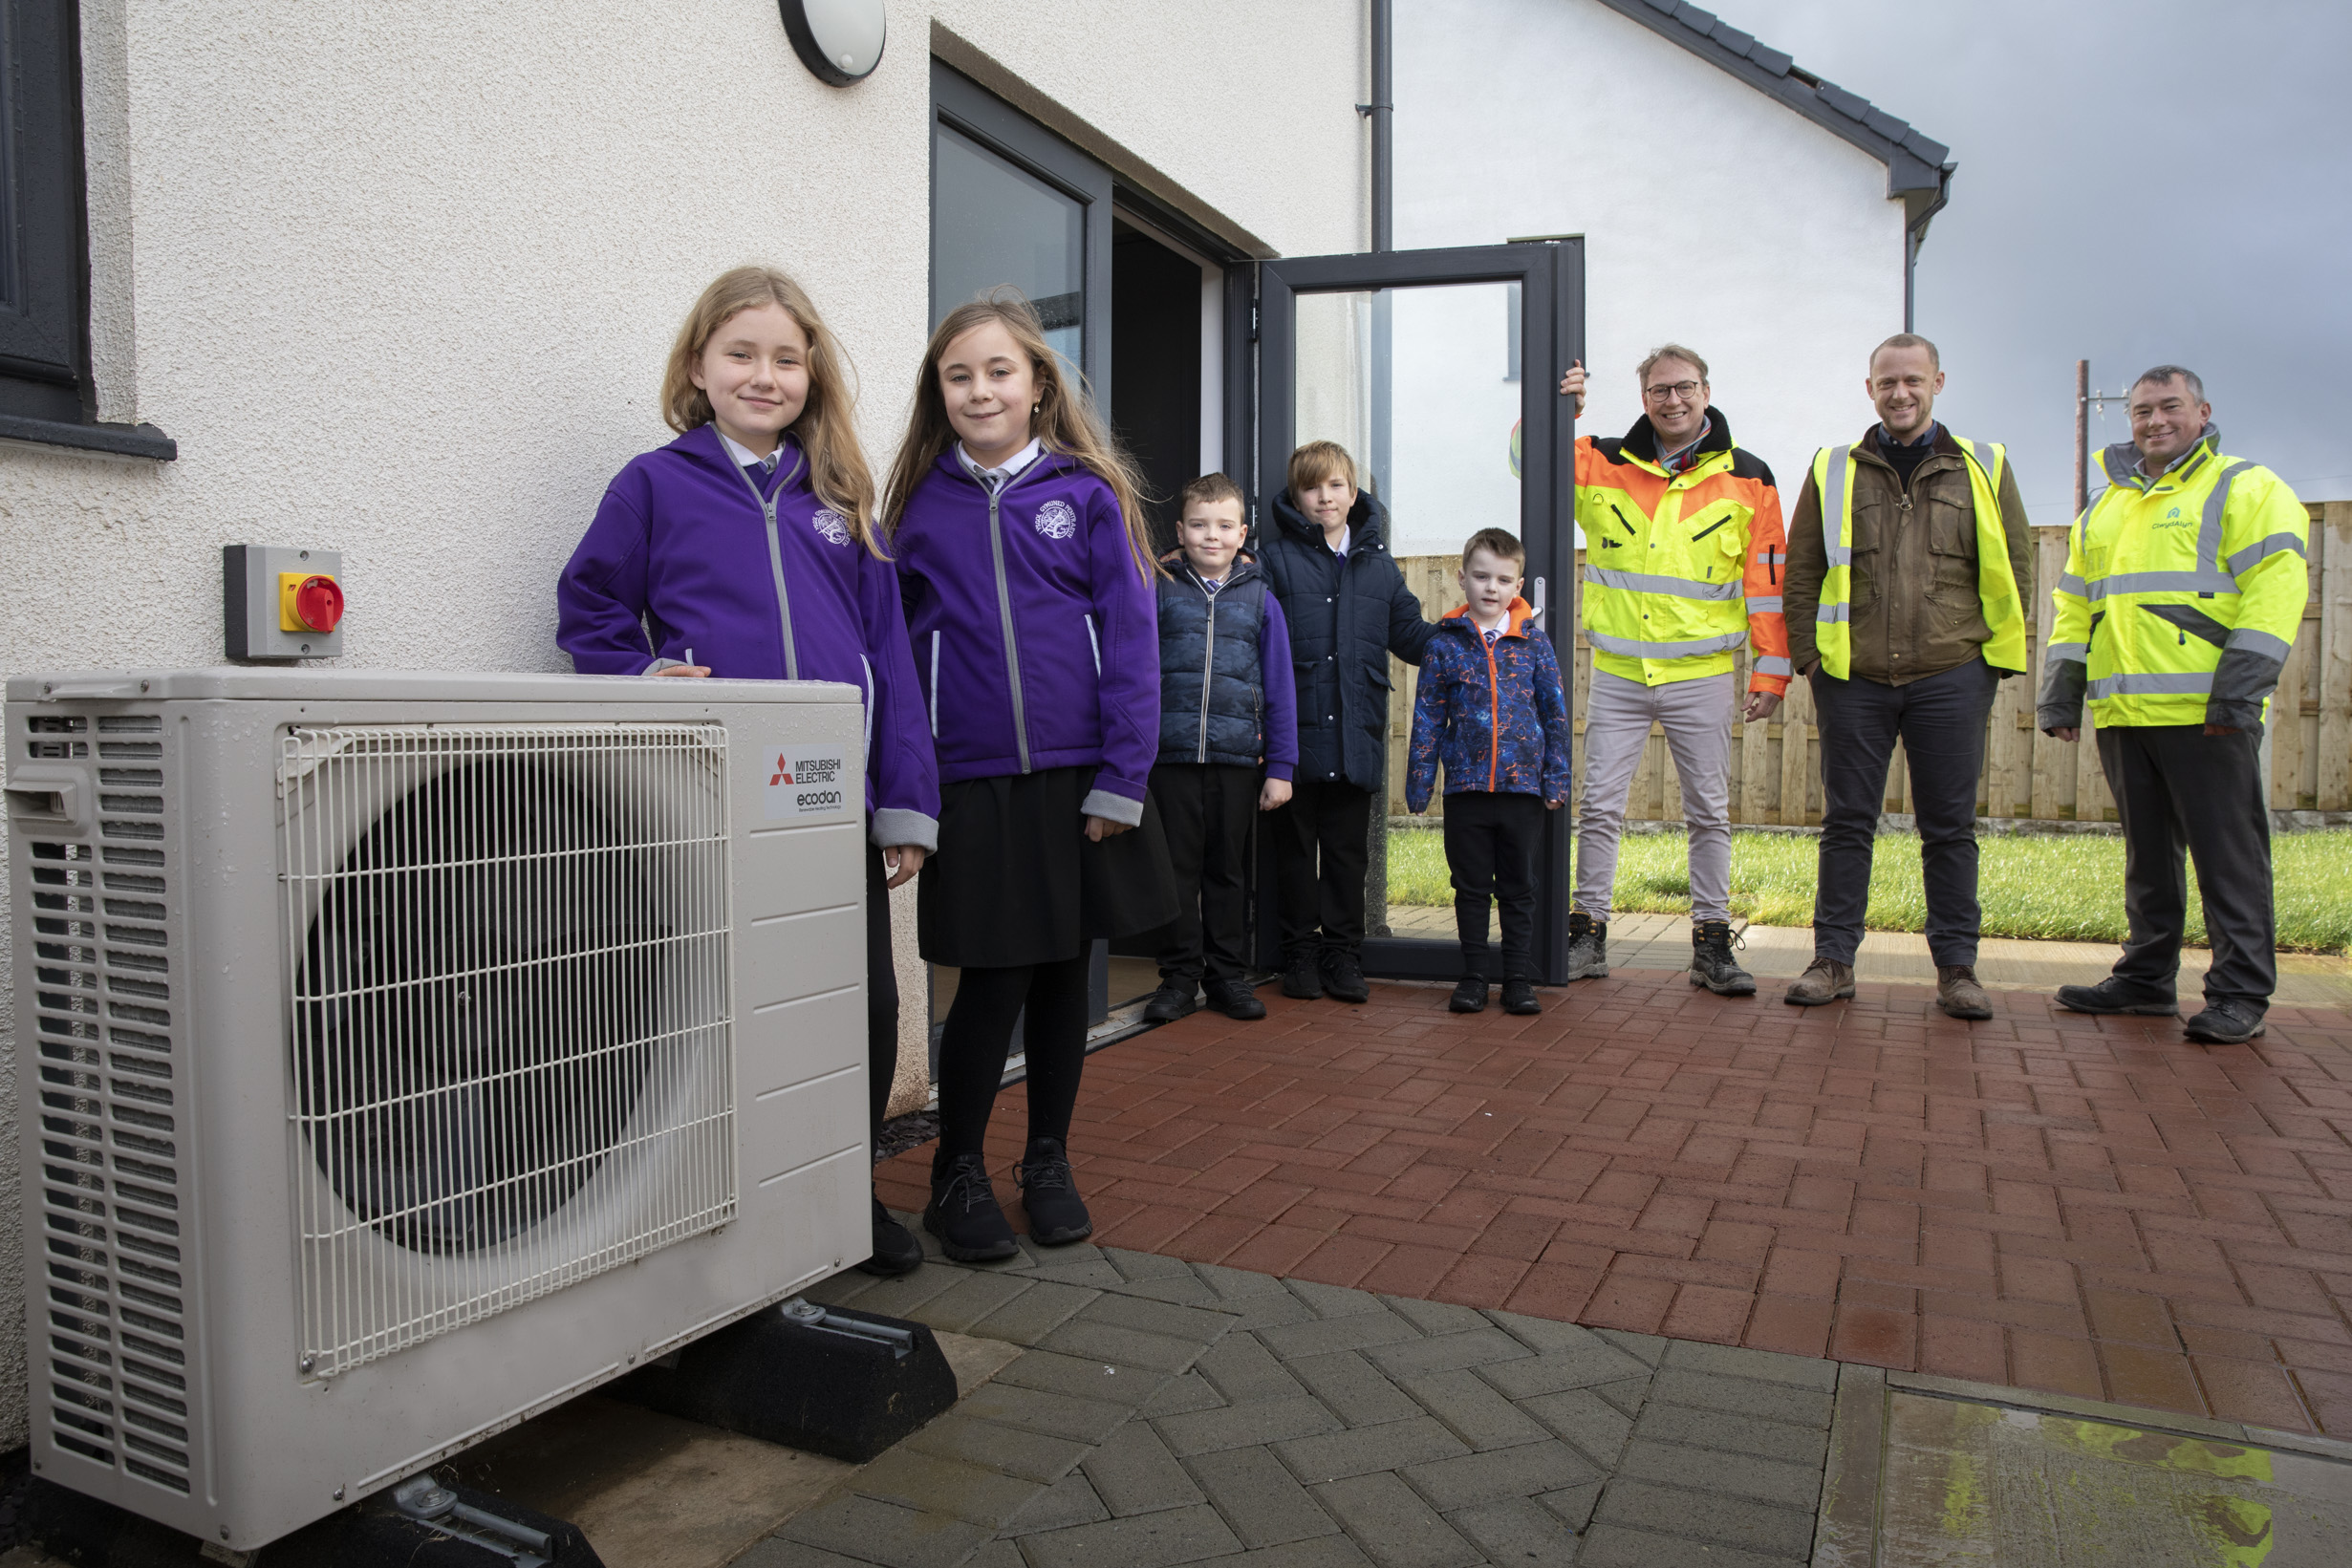 ClwydAlyn Showcases Commitment to Sustainability with Local School Visit to New Housing Project